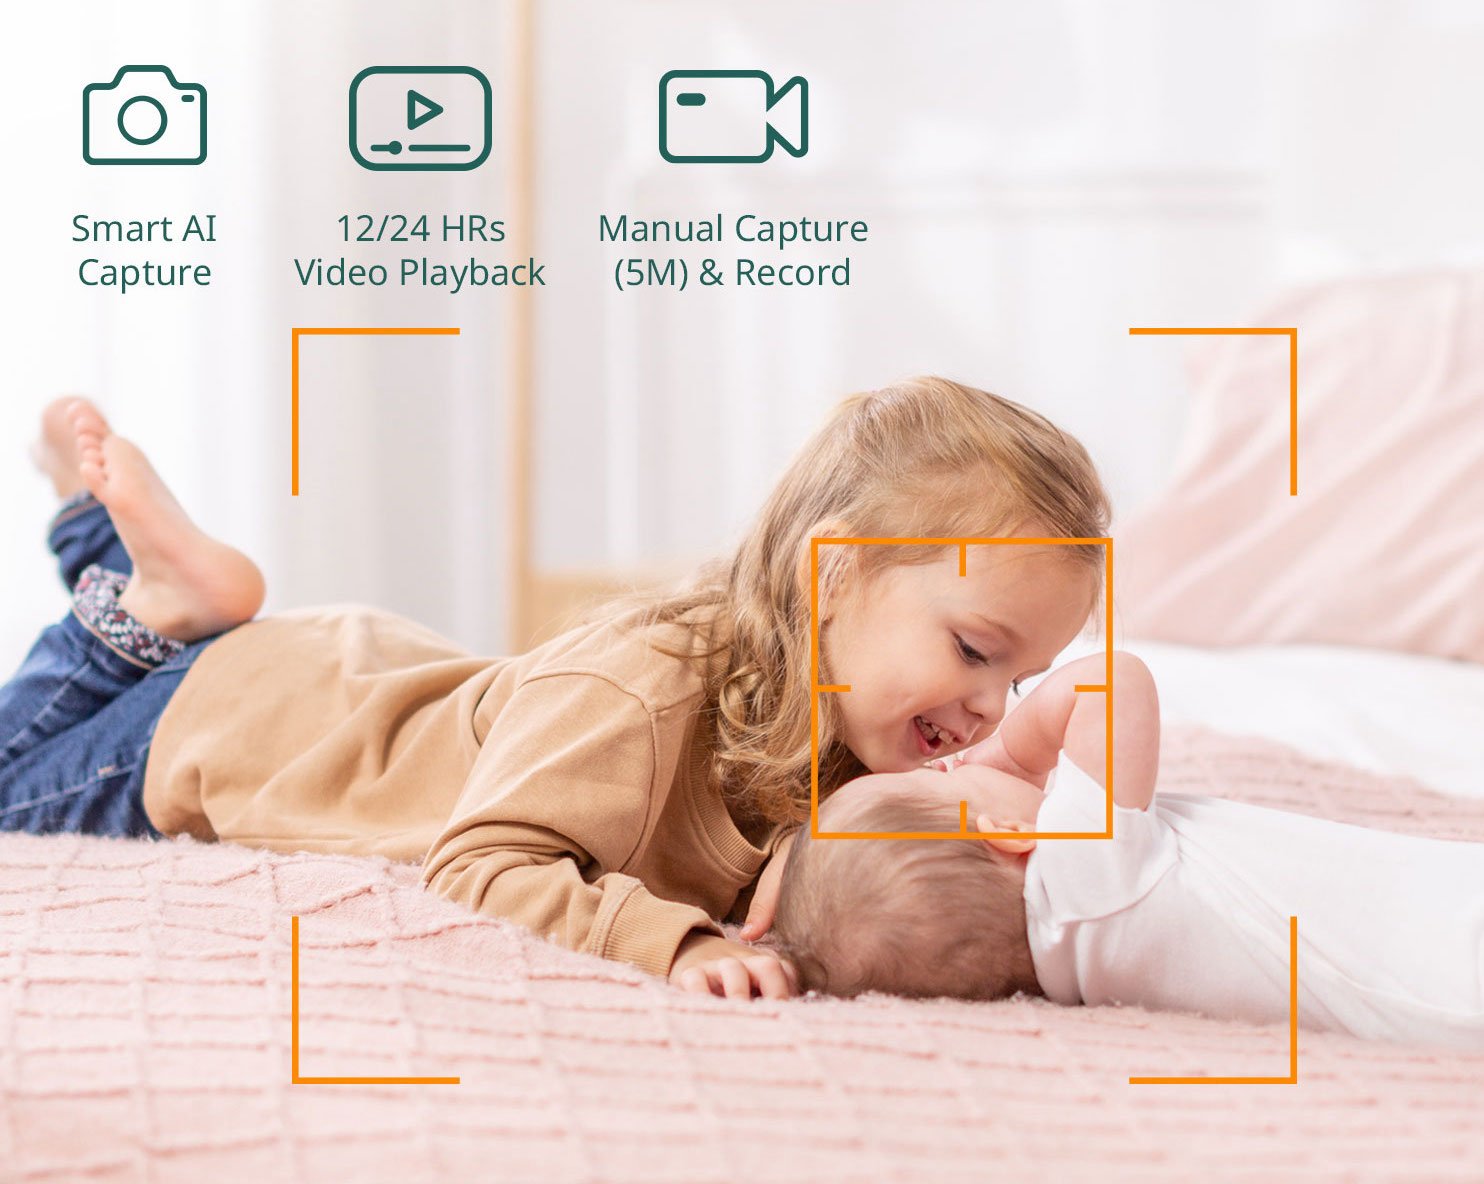 How to Choose a Baby Monitor